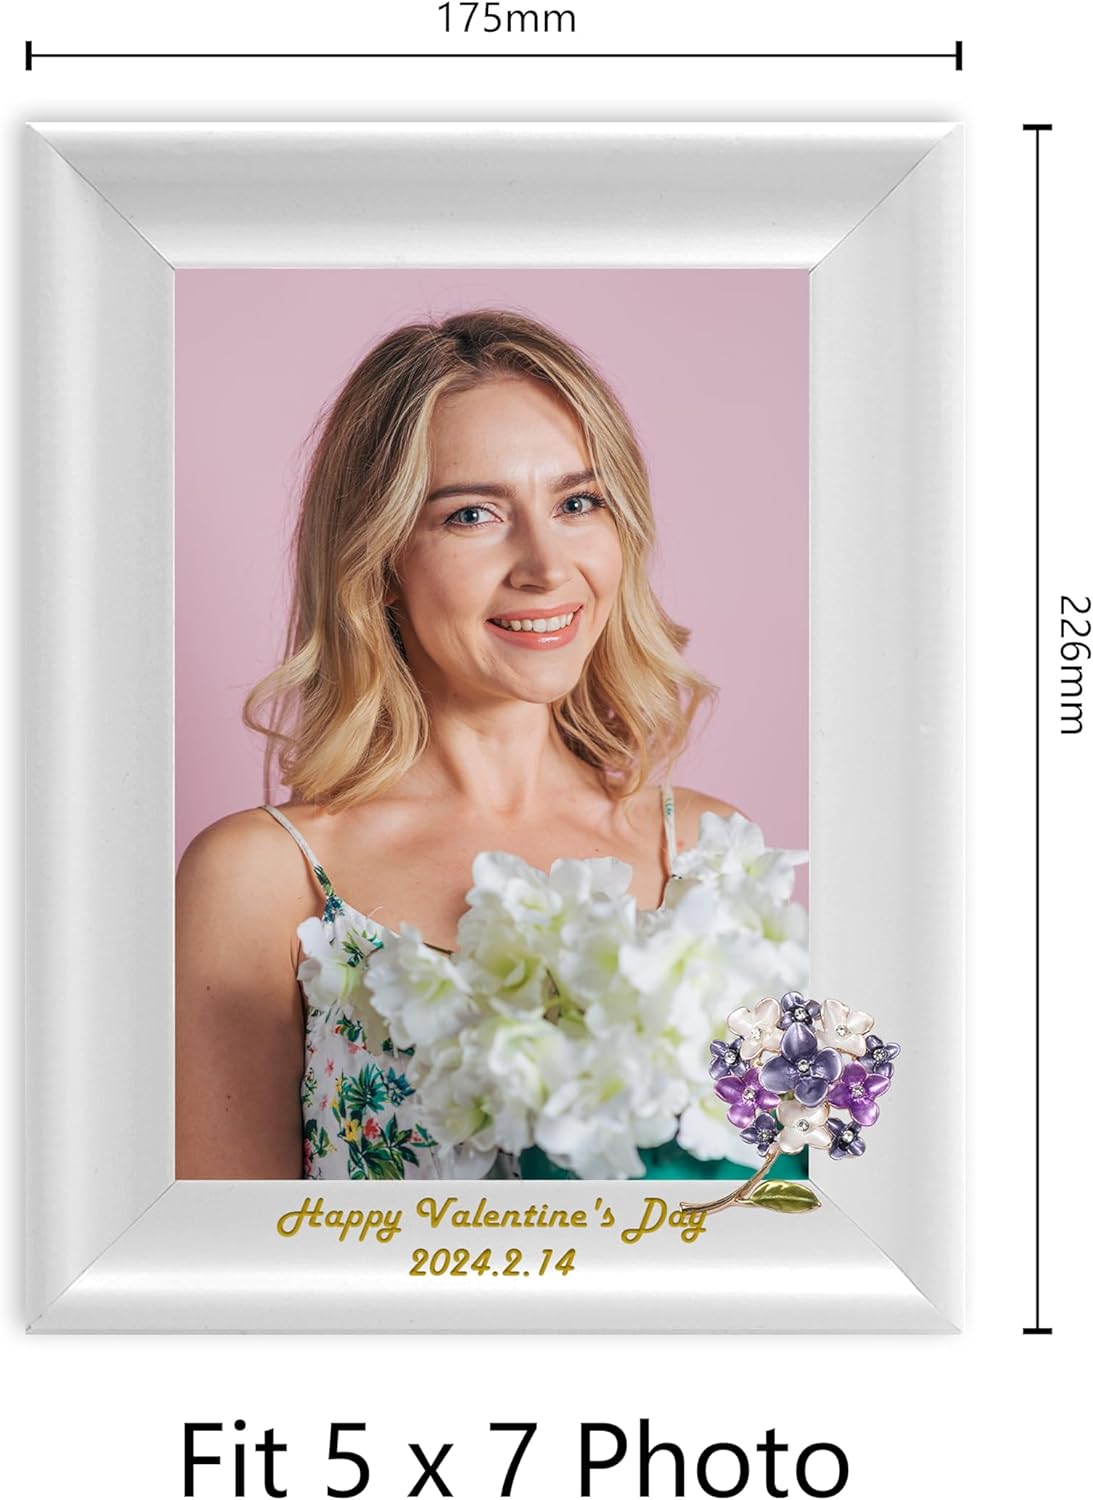 Decoration Ideas For Photo Frames Dotride Custom Picture Frame with a Flower Decoration, Wood Photo Frame with Custom Wooden Carving, Can be engraved with any text you want, suitable for Valentine's Day, Flowers